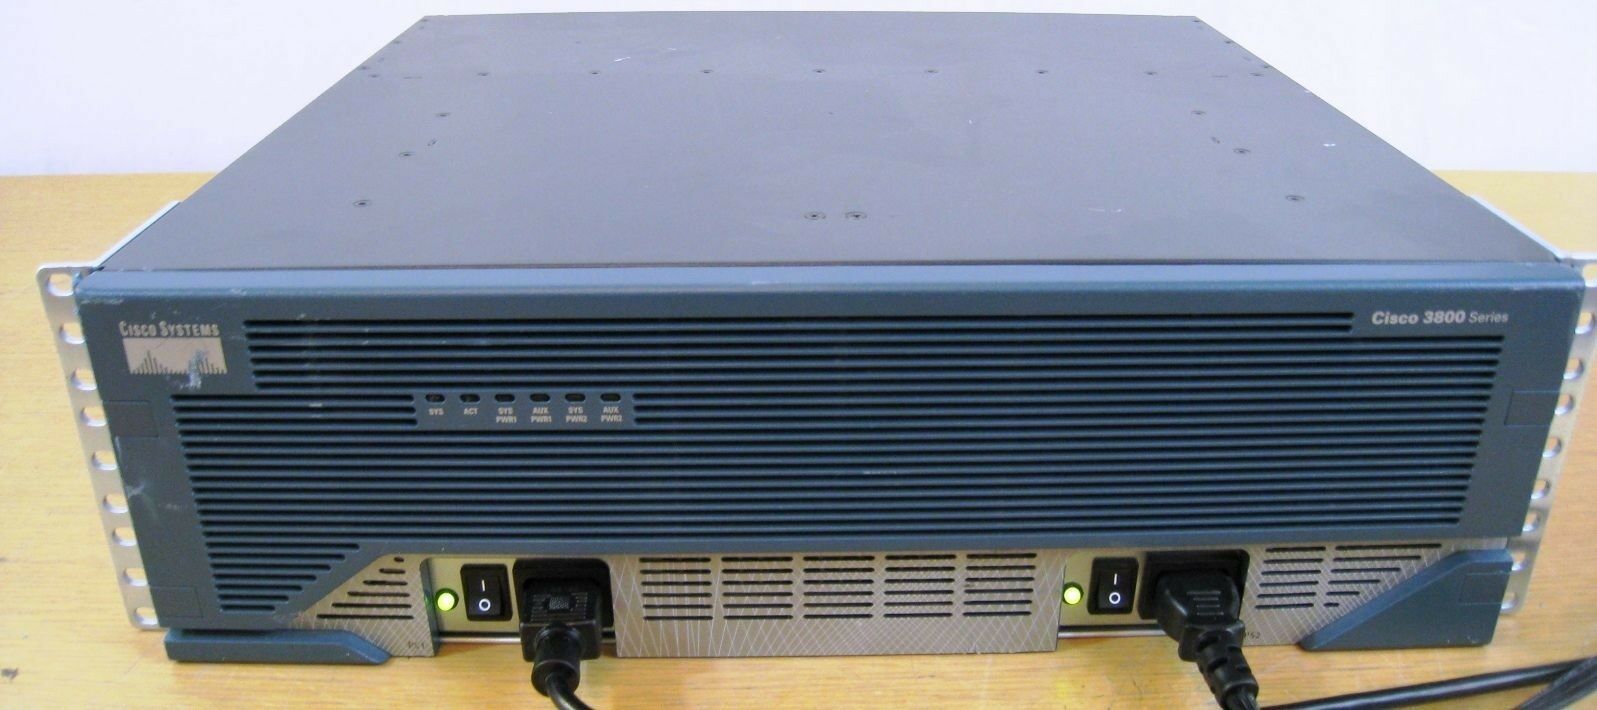 Cisco 3845 Intergrated Router Ios 15.1 1gb Dram/256mb Flash W/ Dual Power Supply